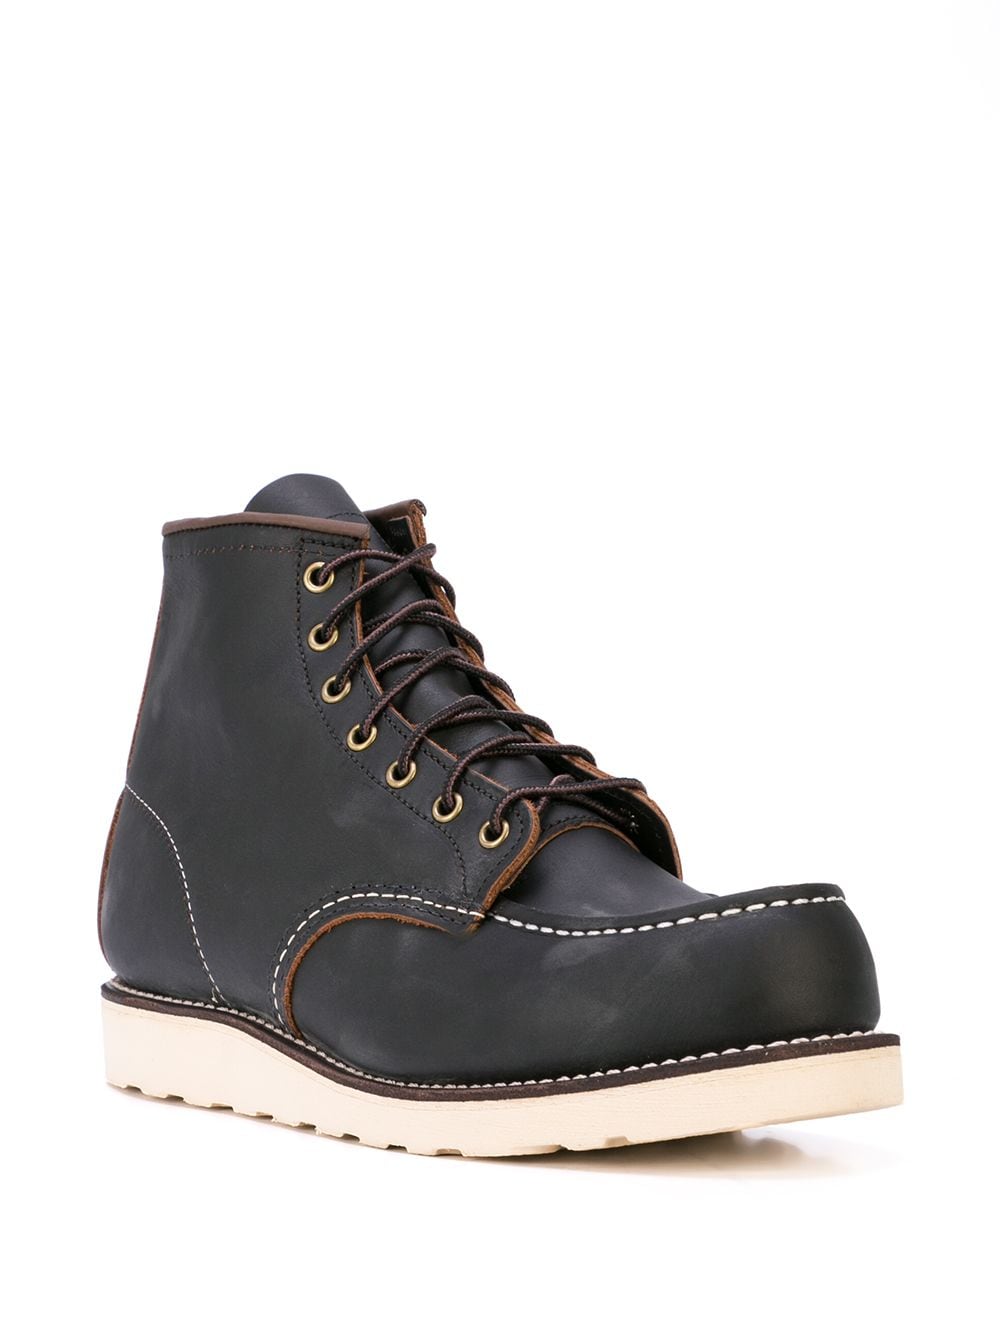 red wing shoes combat boots